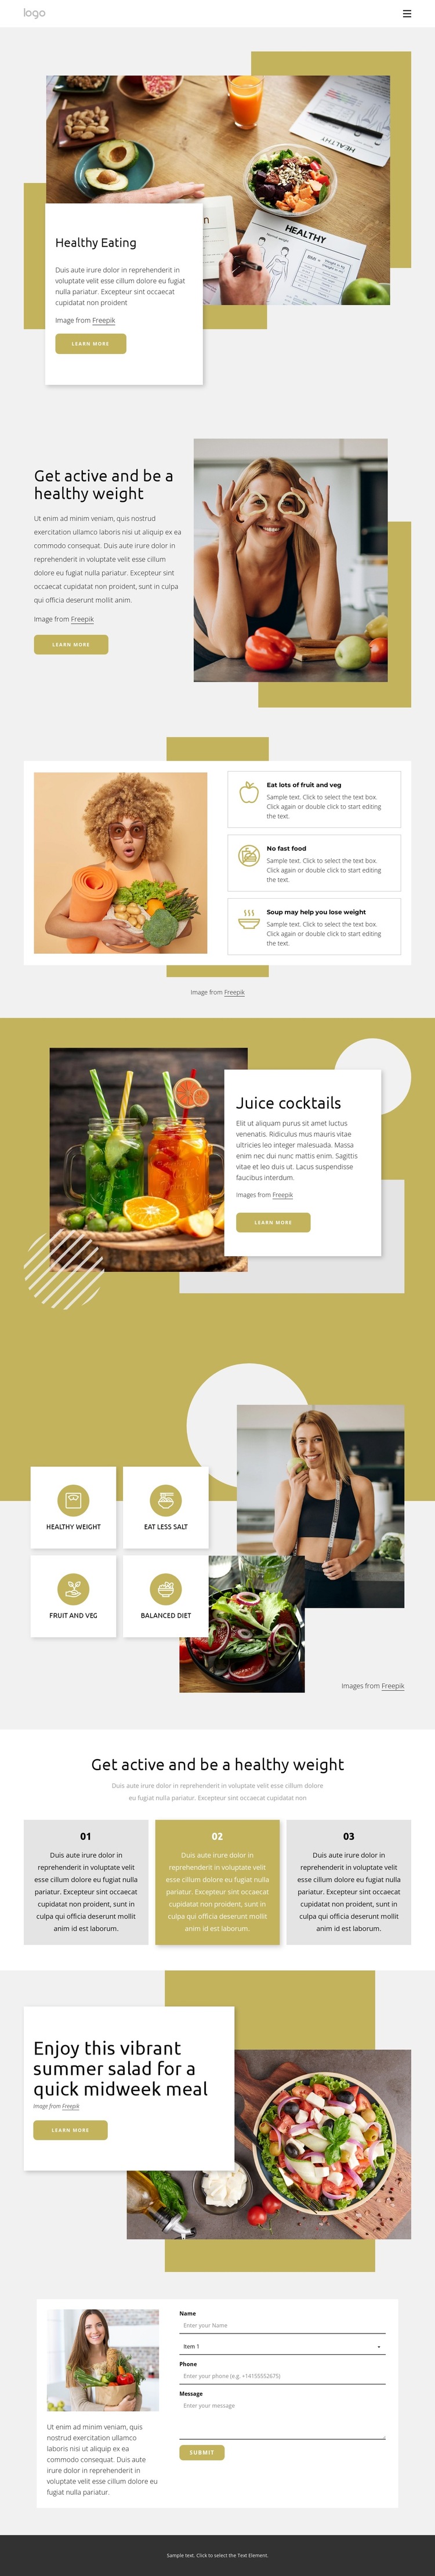 Focus on healthy eating HTML5 Template